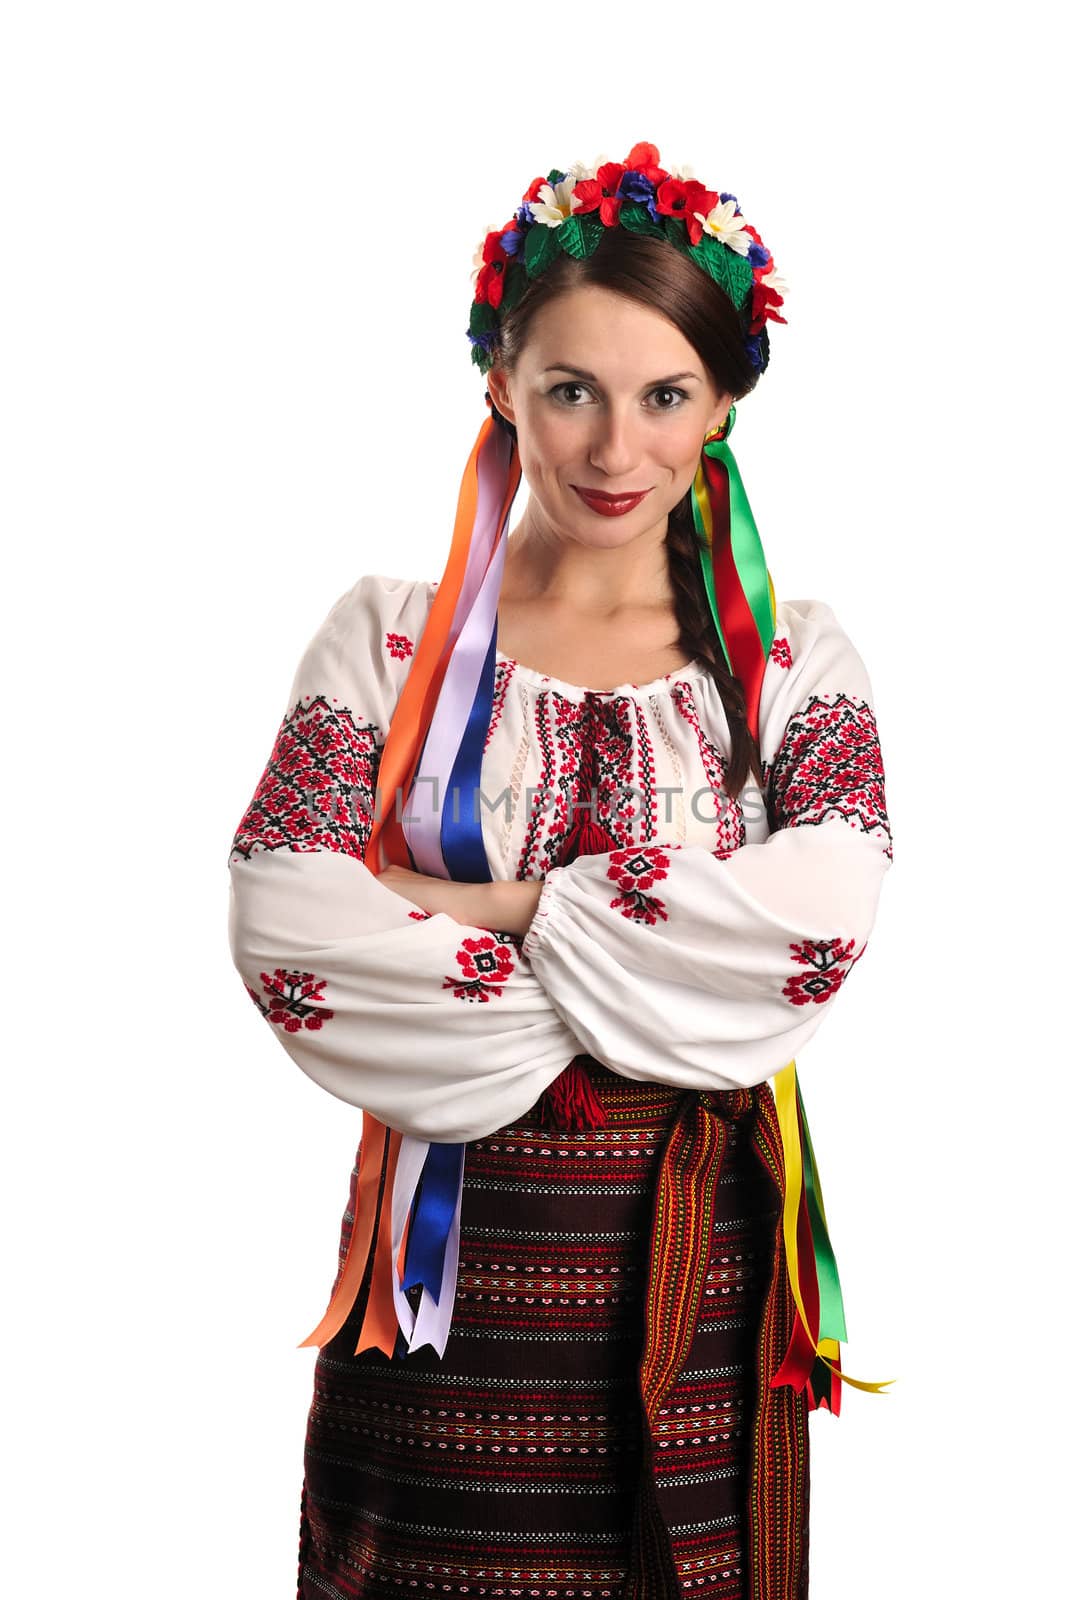 Ukrainian woman in national costume by kirs-ua